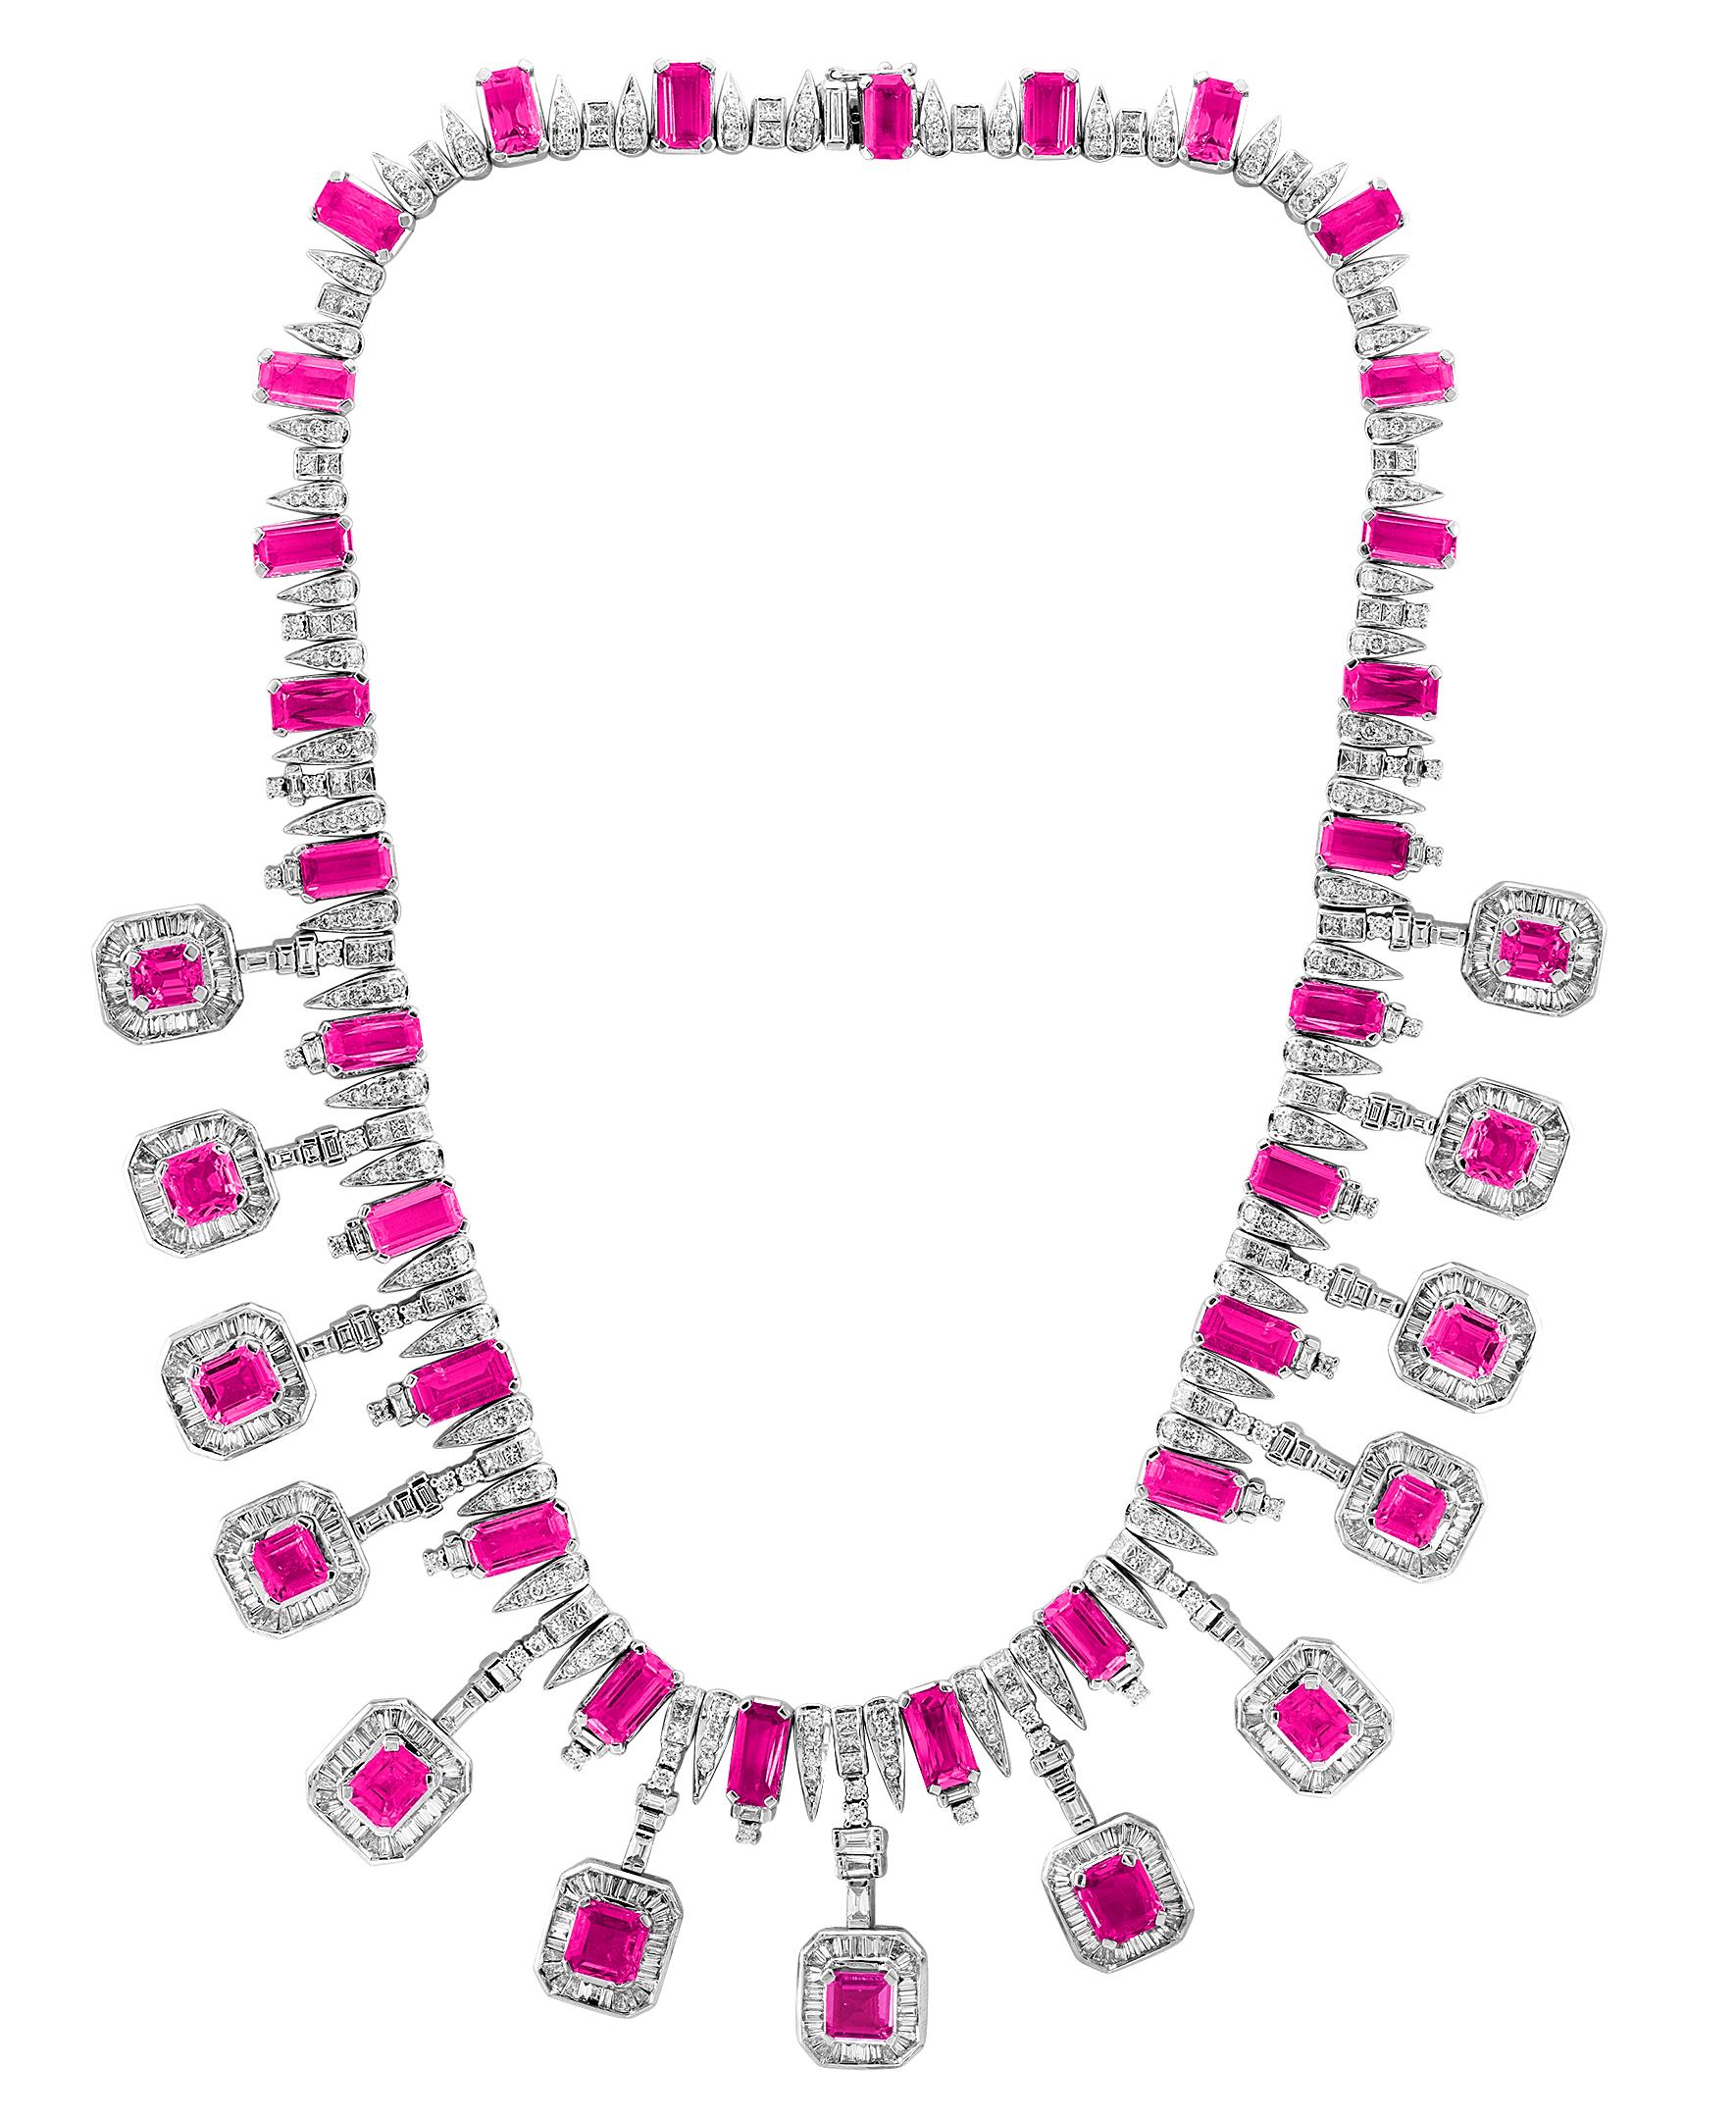 
GIA Certified, No Heat, Medagaskar  natural  60 Ct Pink Sapphire & 25 Ct Diamond Necklace Suite 18 Karat white gold 150 Gm
This bridal suite made out of 18 Karat gold .Necklace consisting of 13 emerald cut pink sapphires , each surrounded by